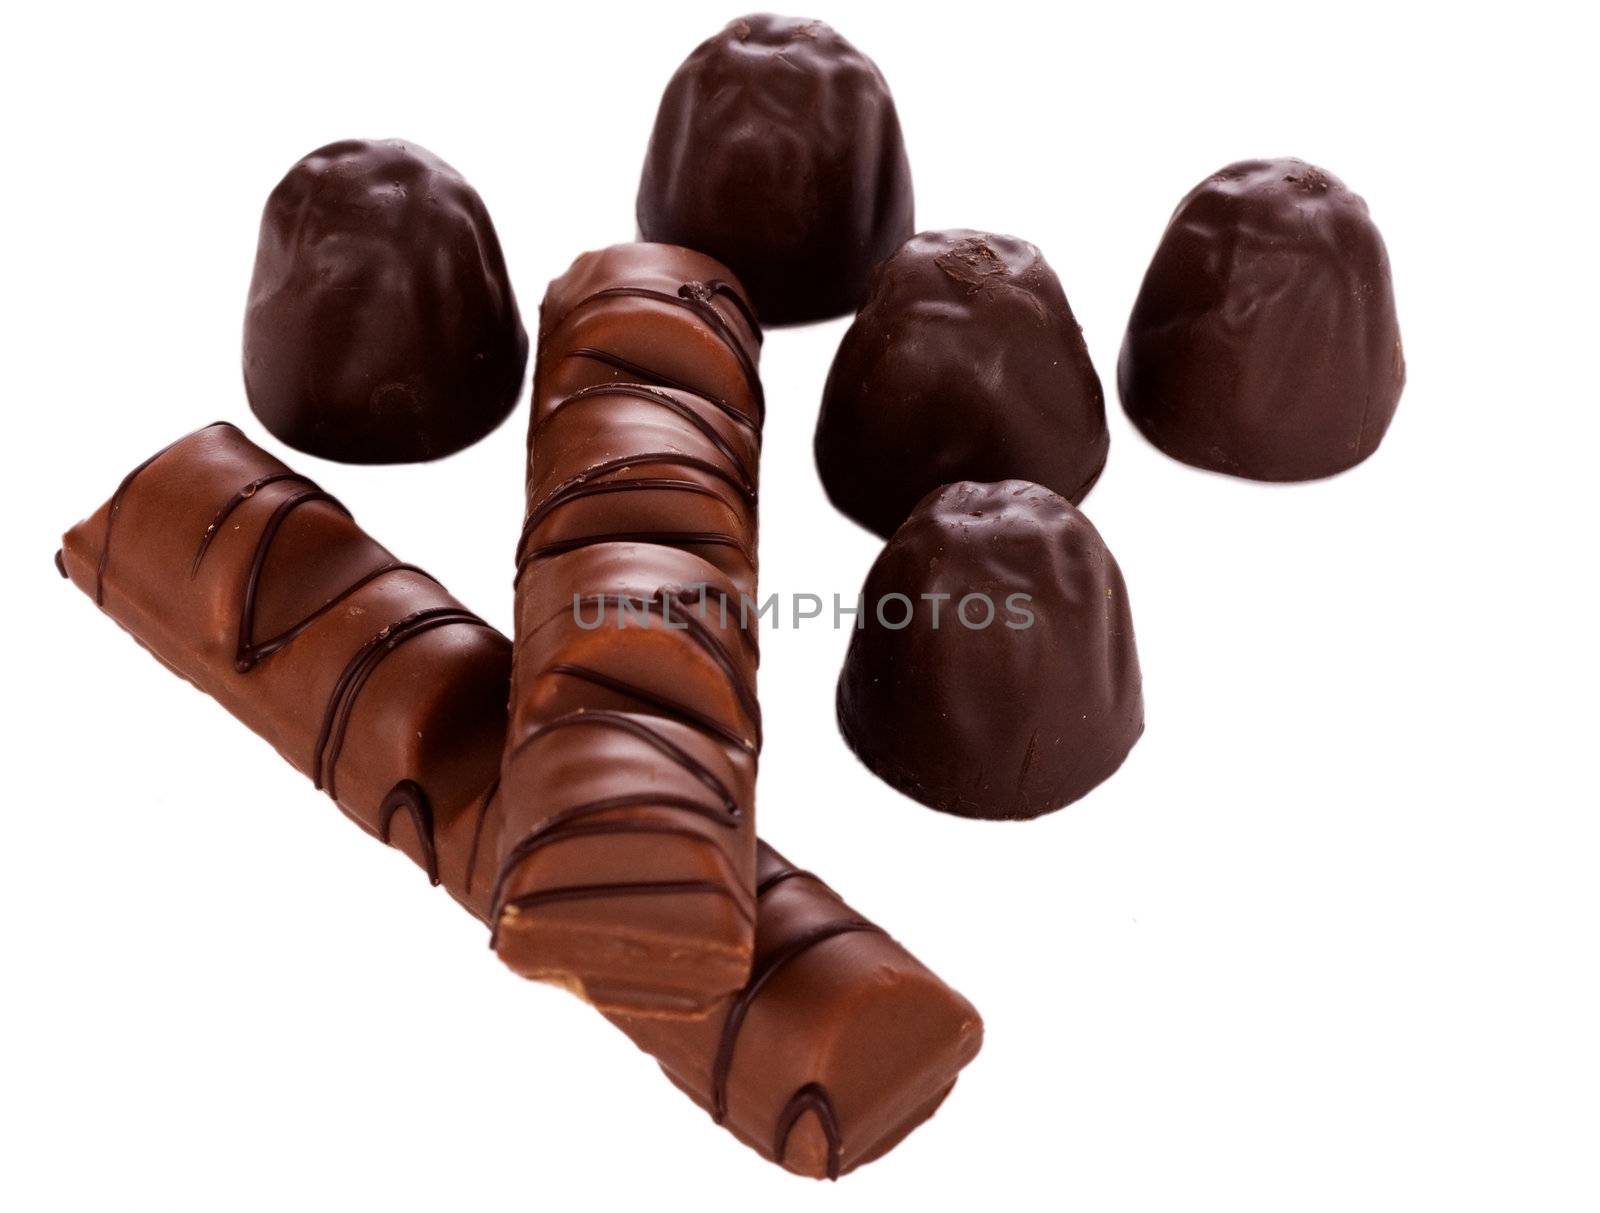 Chocolate candies isolated on white background.
